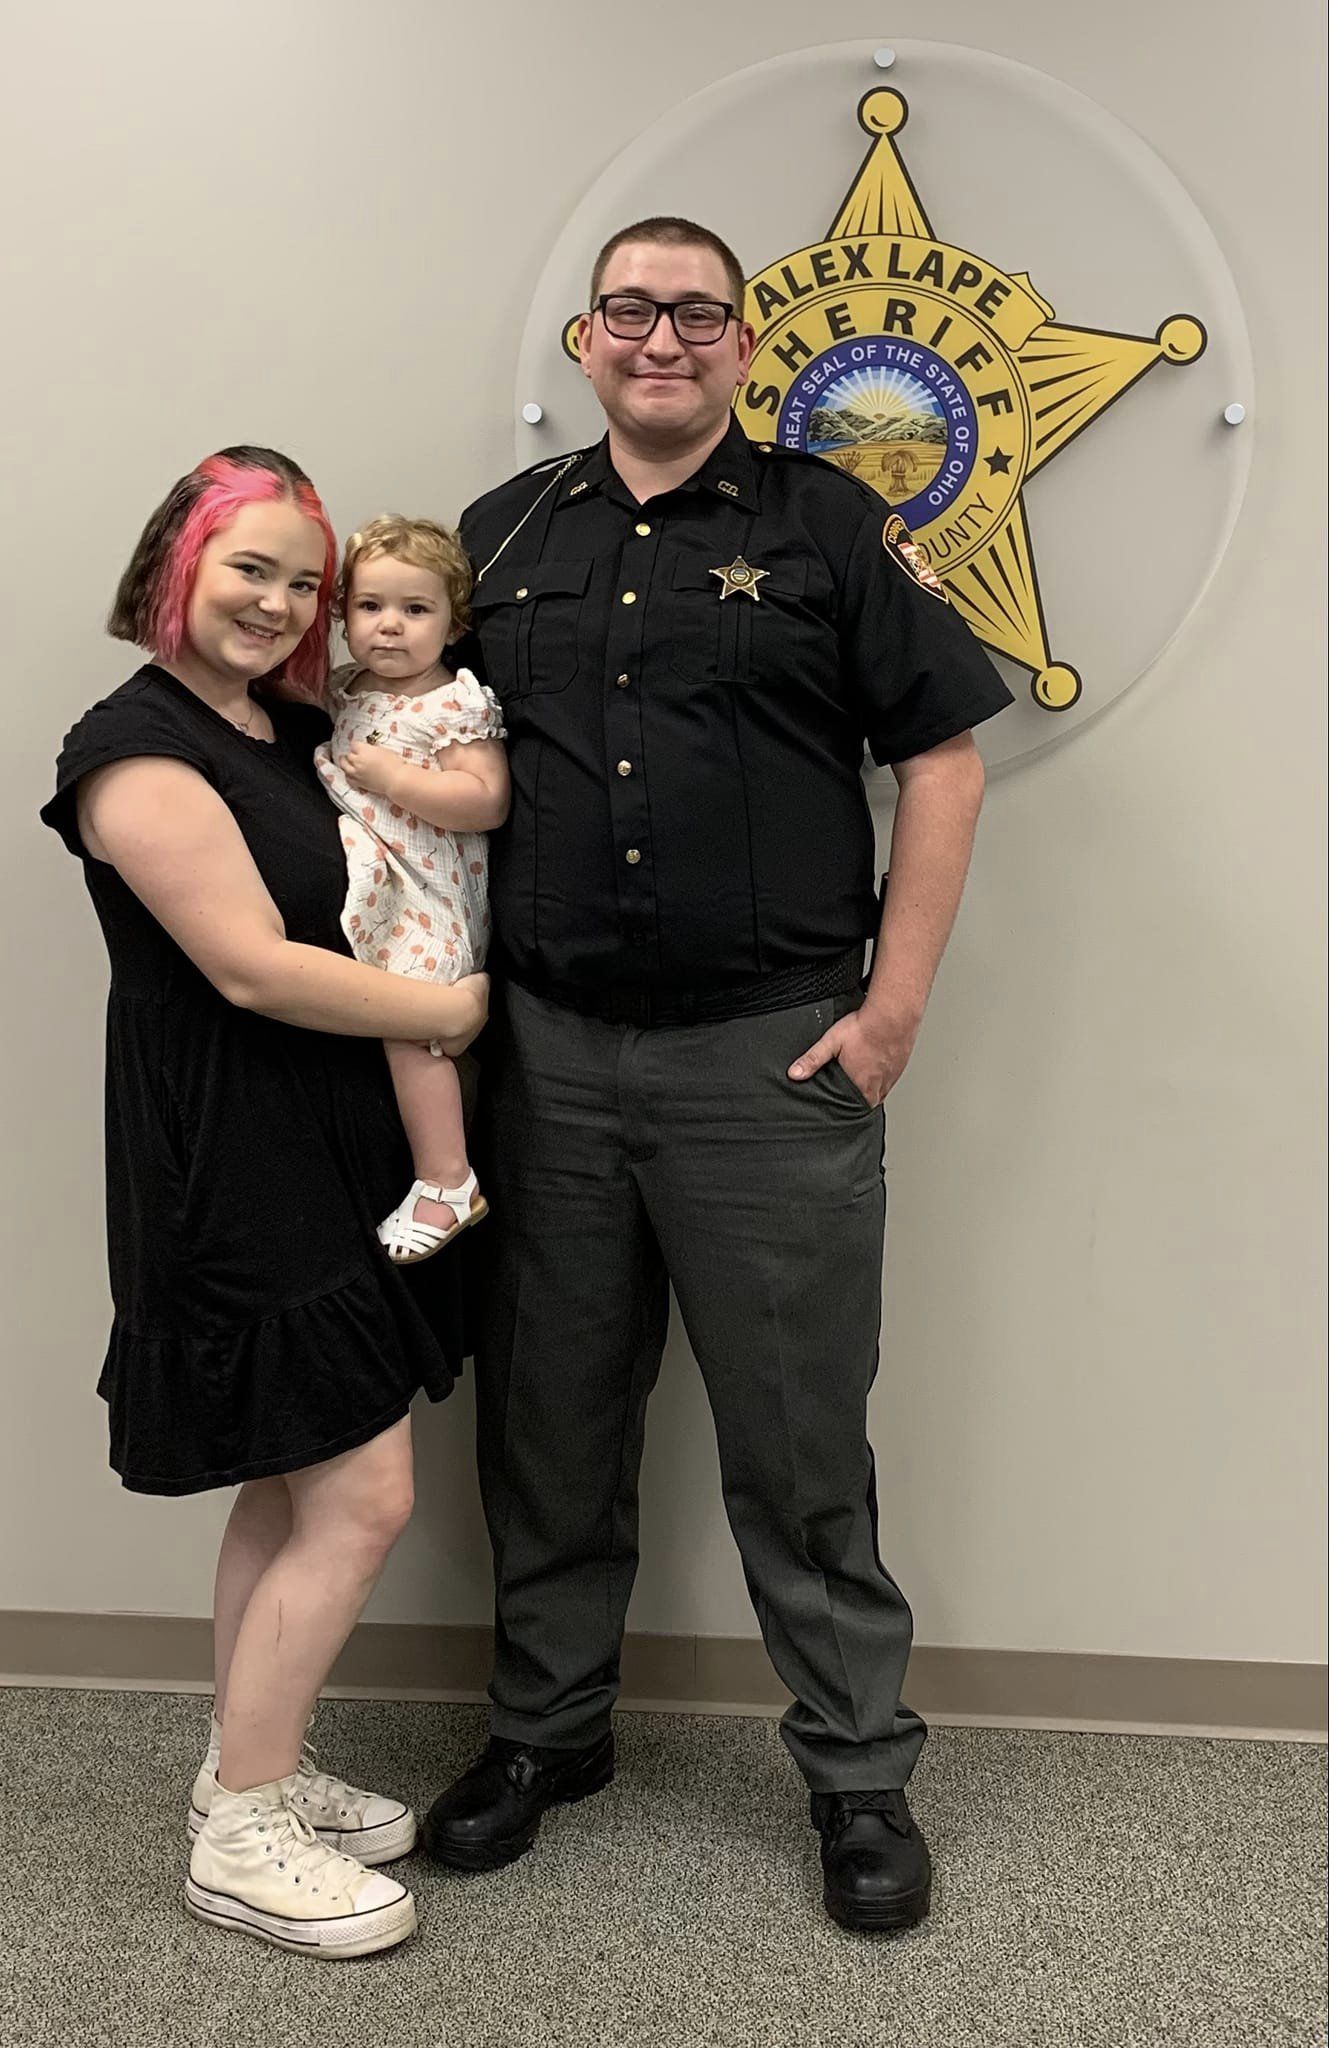 sheriff, woman and baby